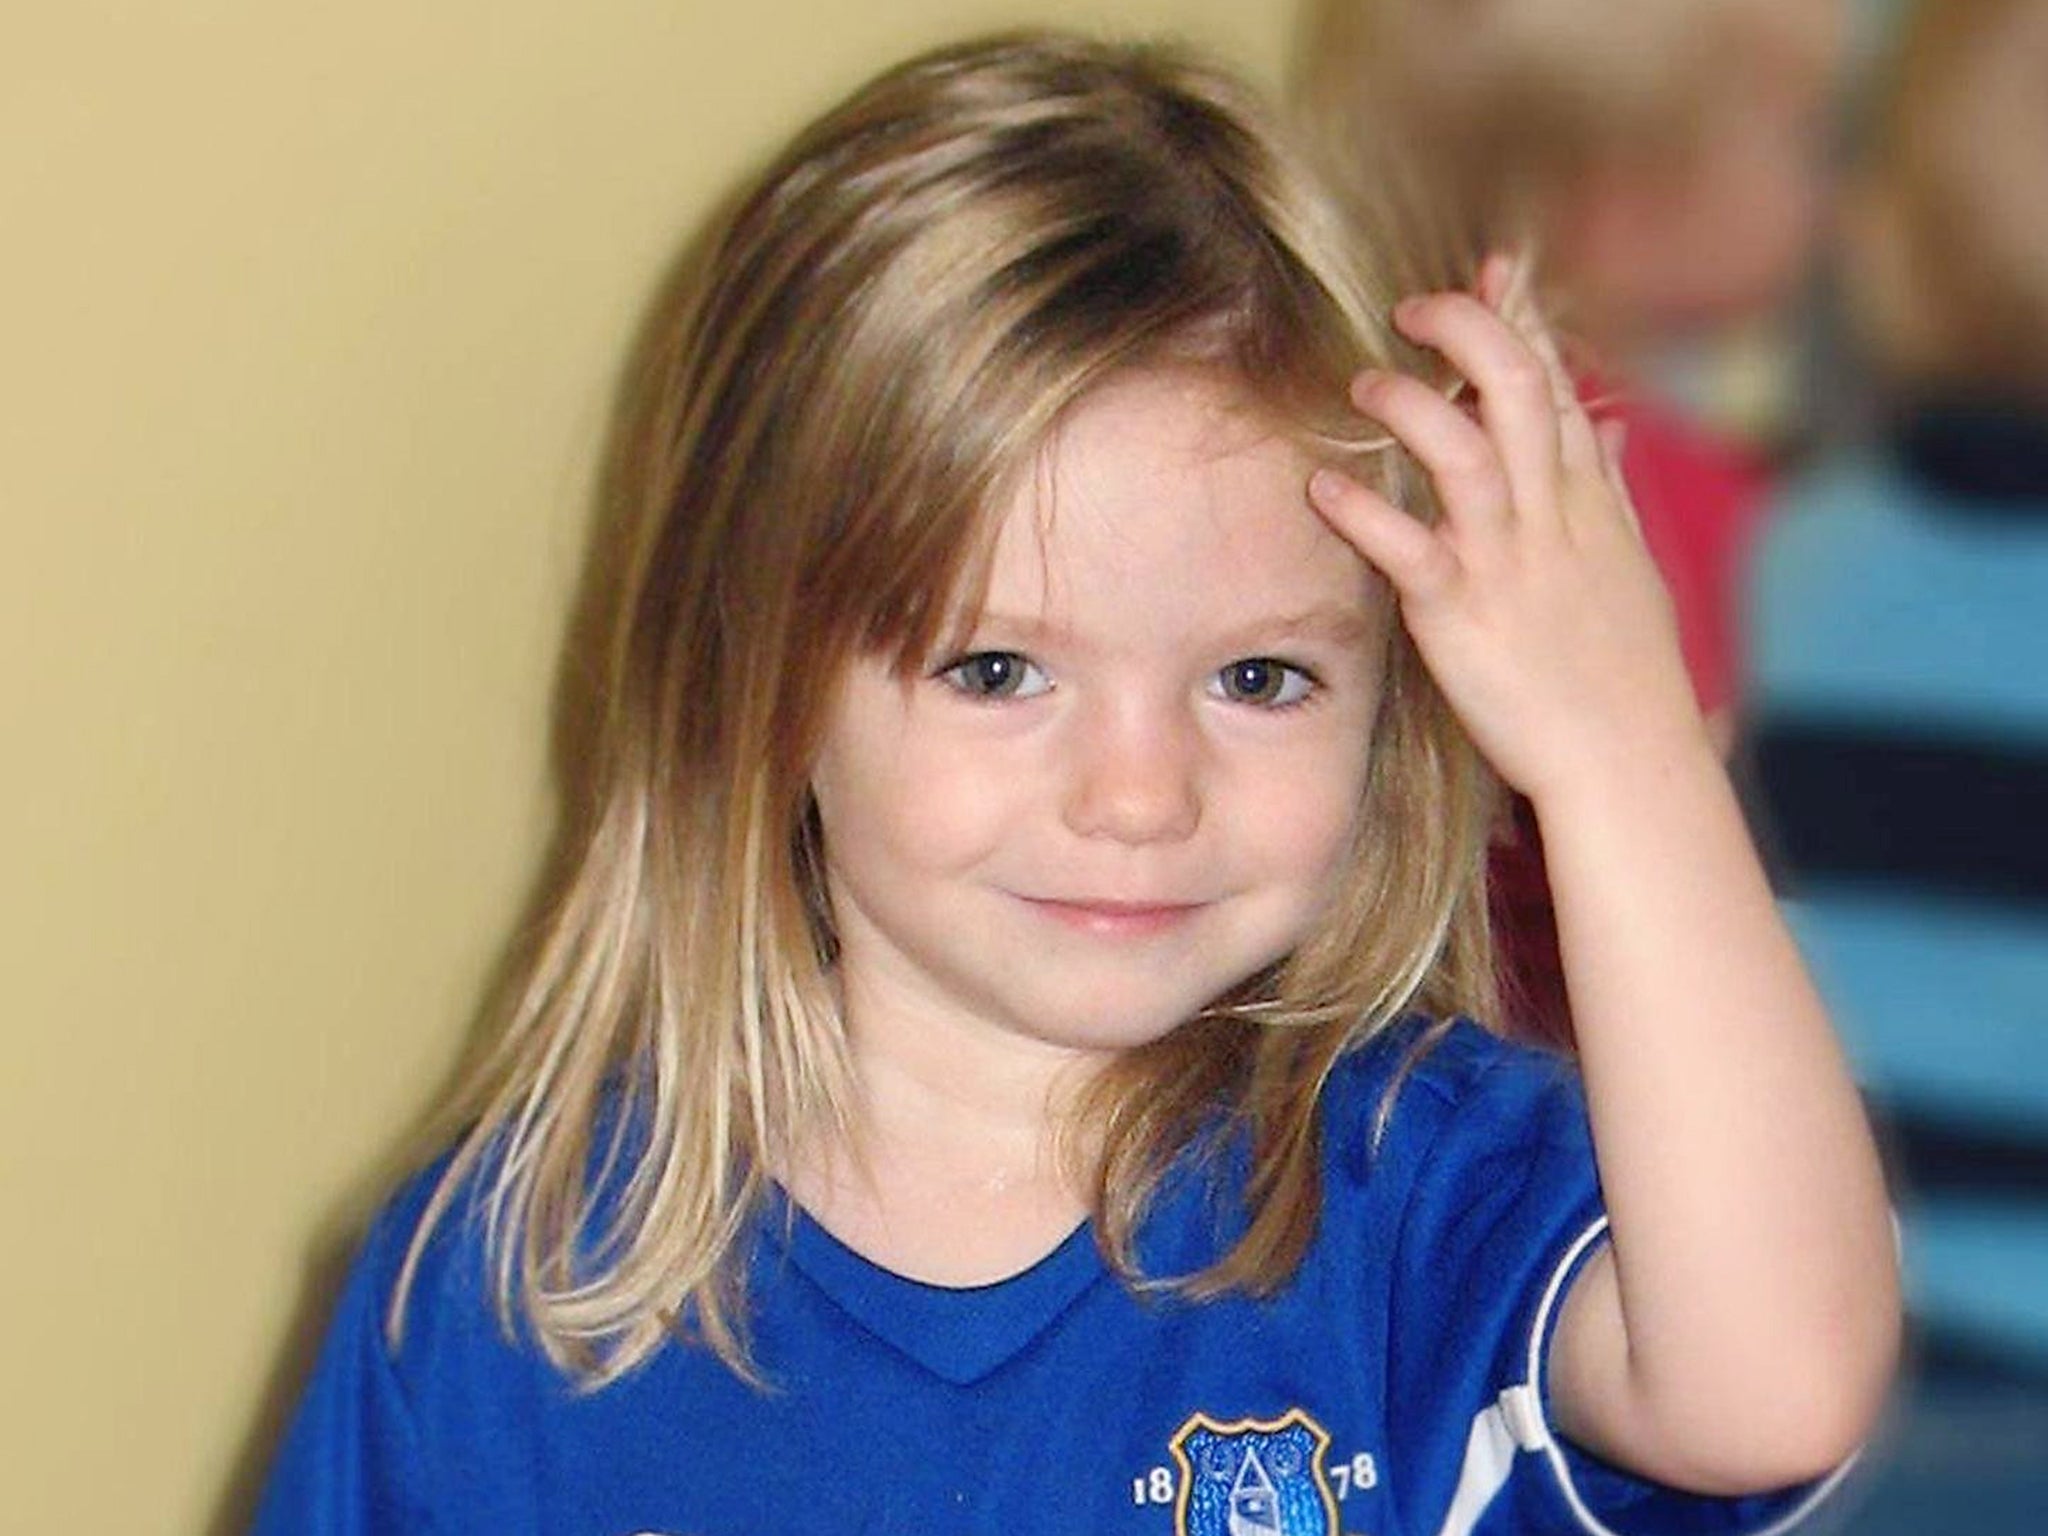 Kevin Halligen: Private detective accused of misusing Madeleine McCann donations is found dead